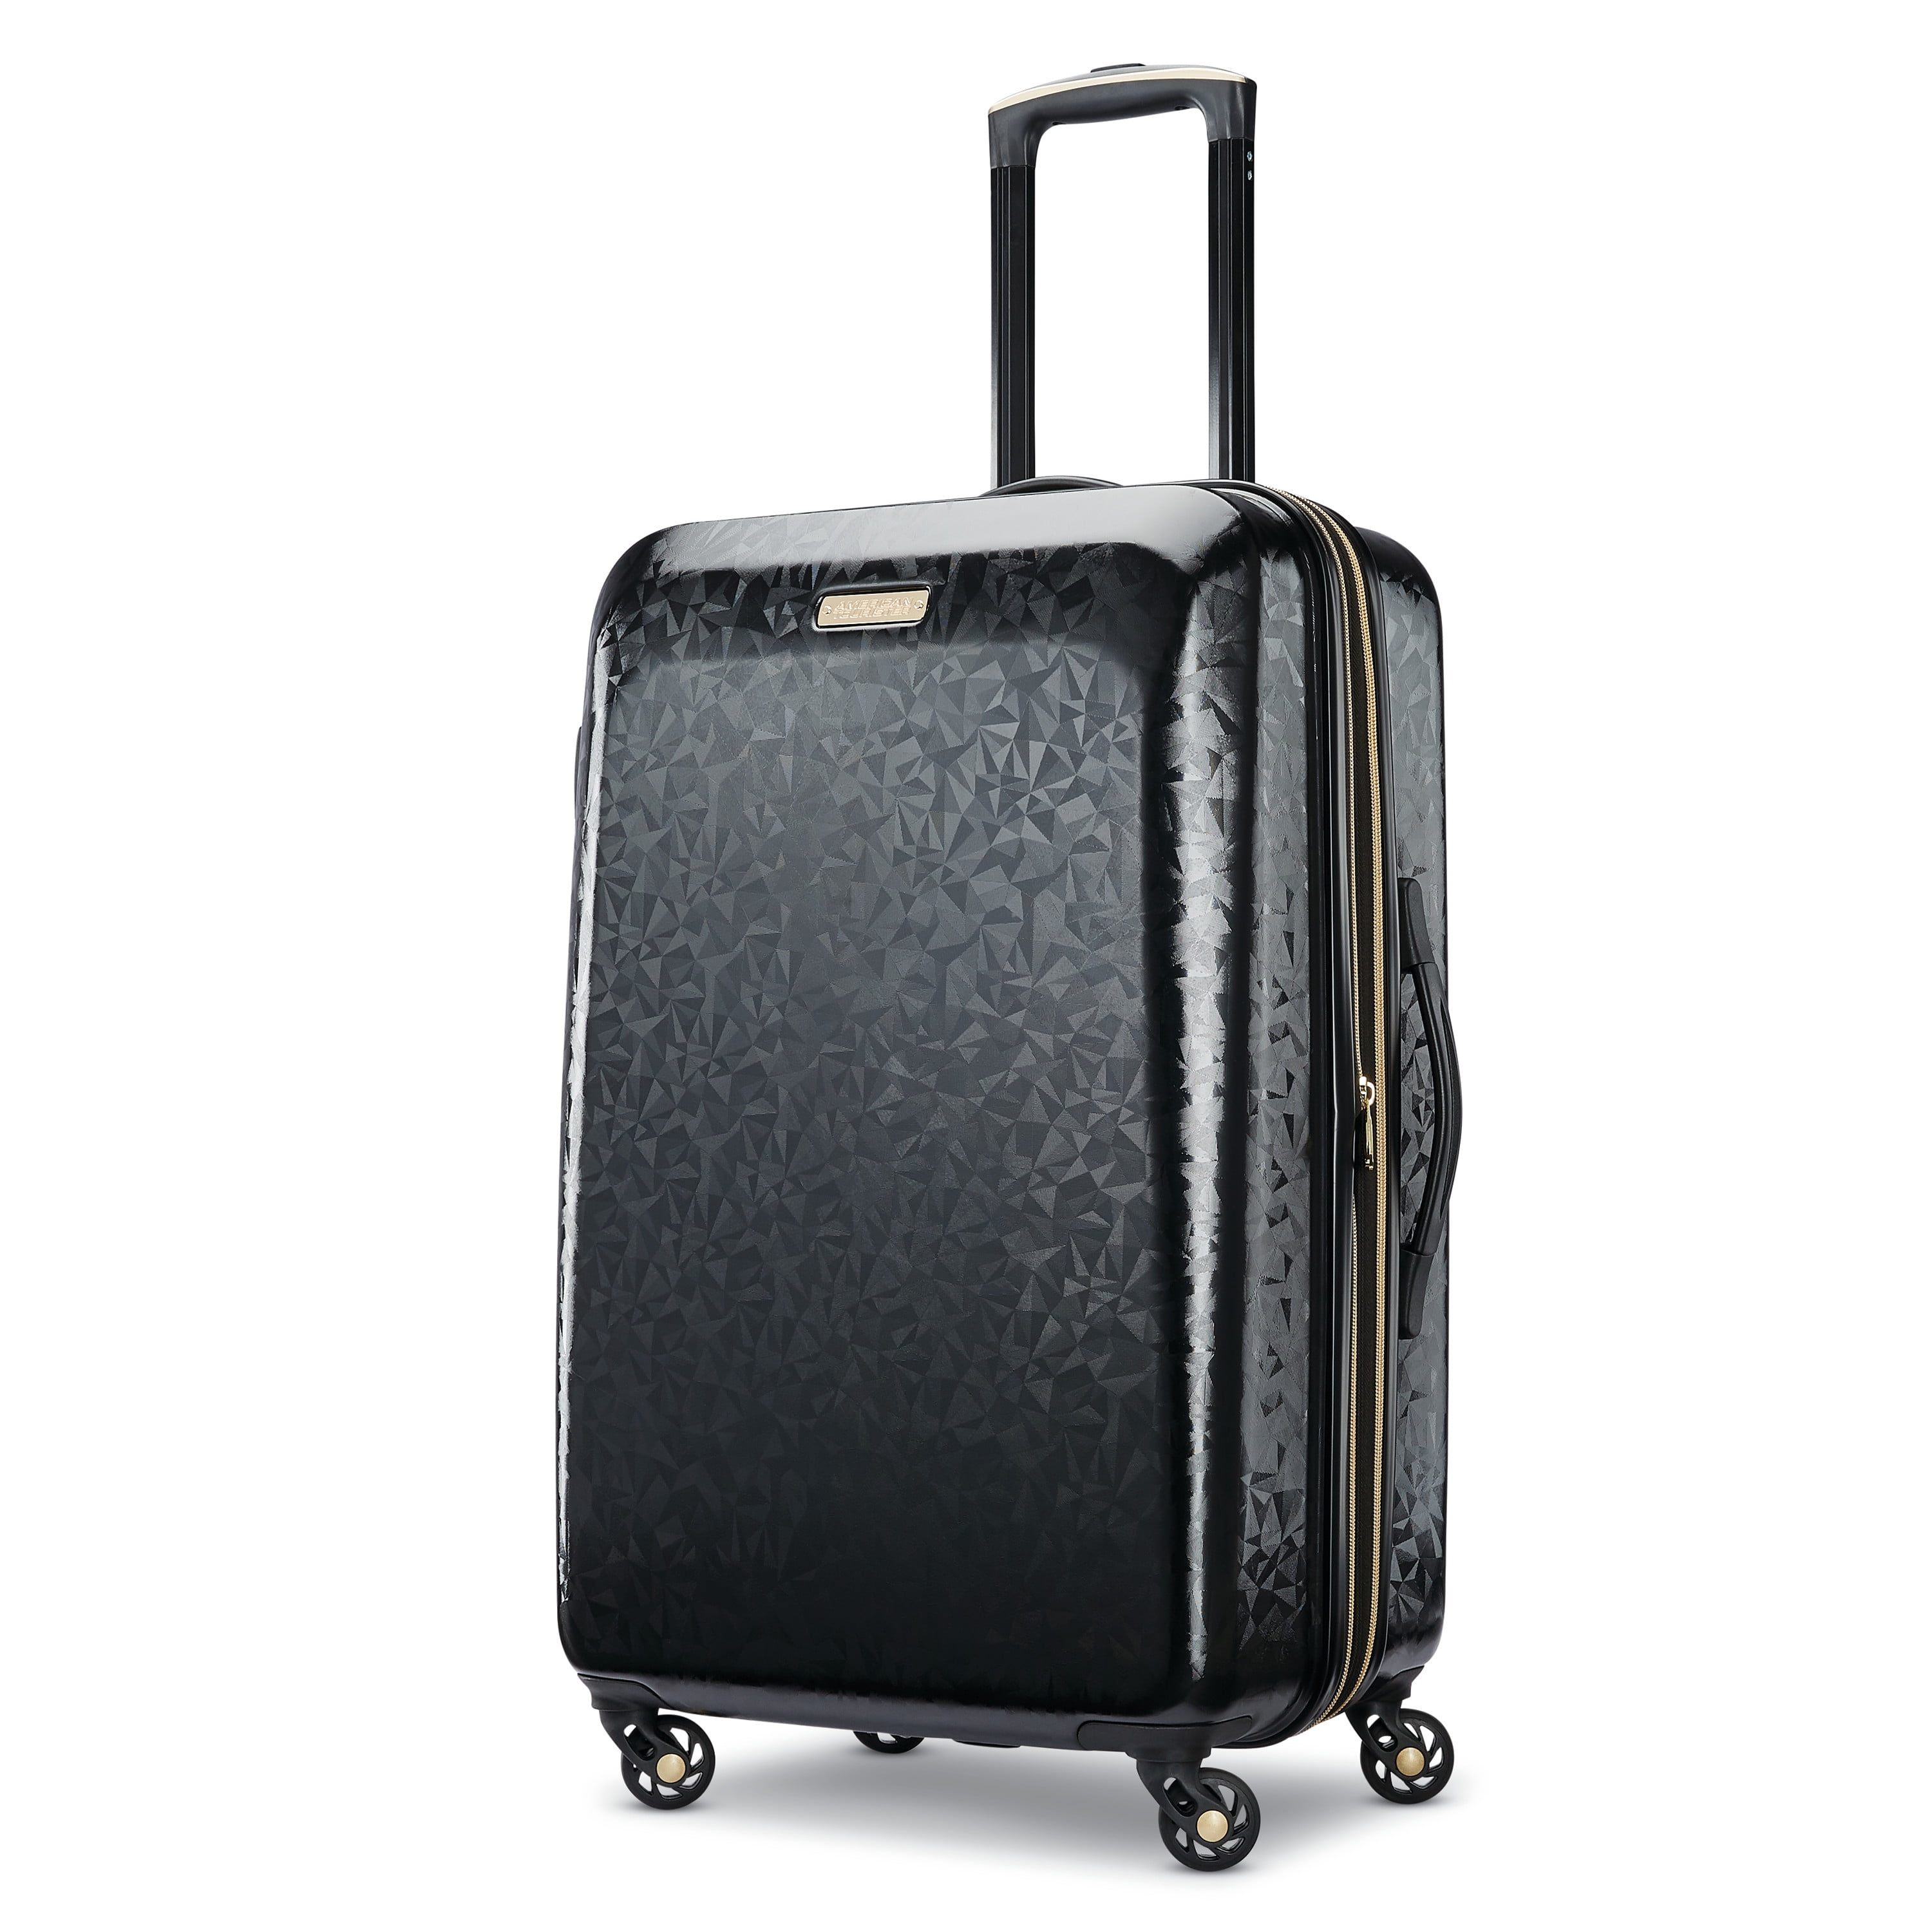 American Tourister Belle Voyage 24-inch Hardside Spinner, Checked Luggage, Piece - Walmart.com